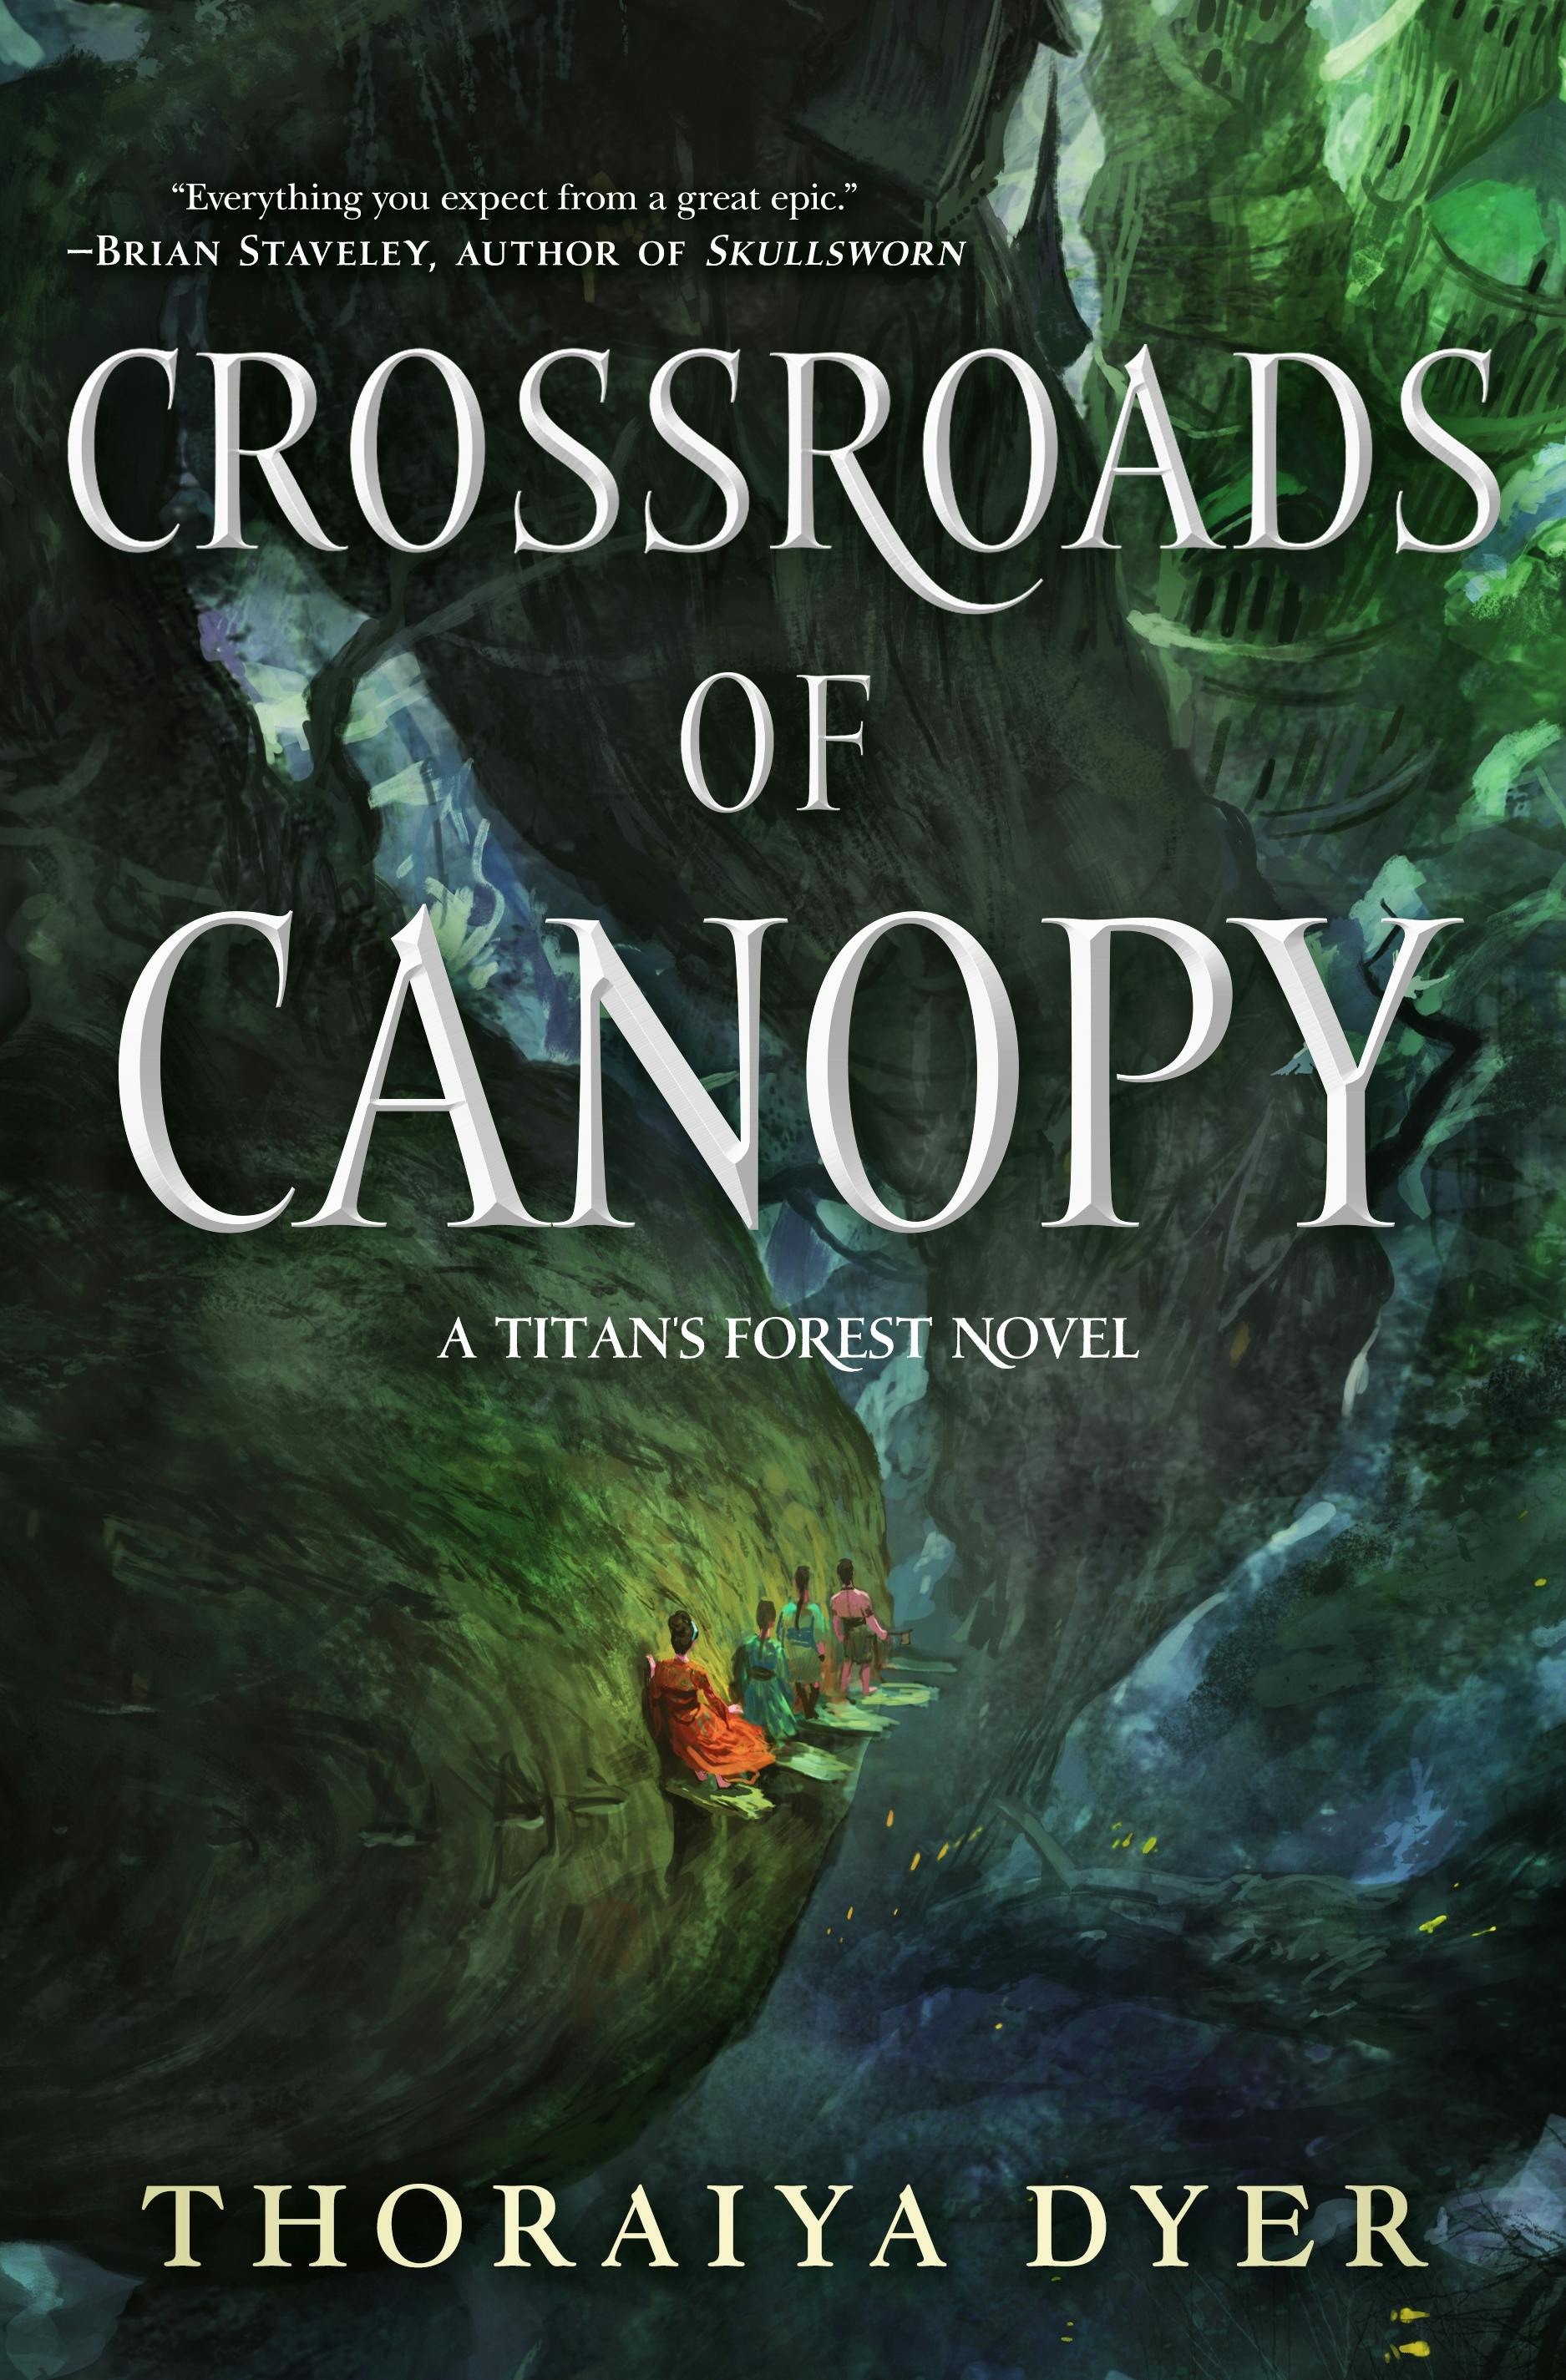 Image of Crossroads of Canopy